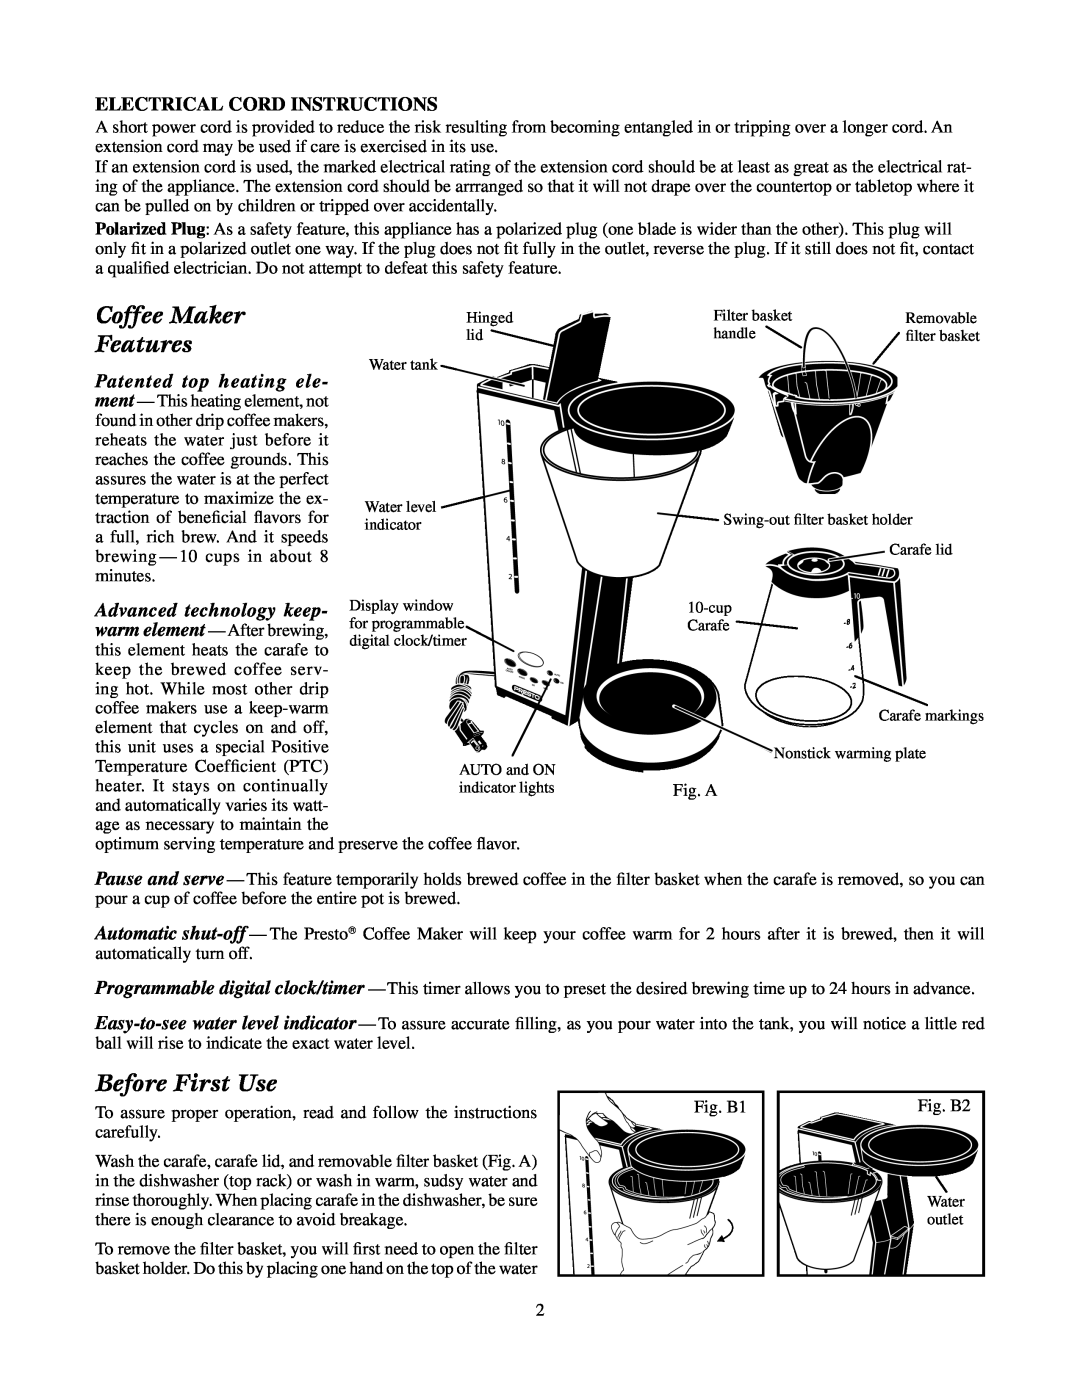 Presto Scandinavian Design manual Coffee Maker Features, Before First Use, Electrical Cord Instructions 